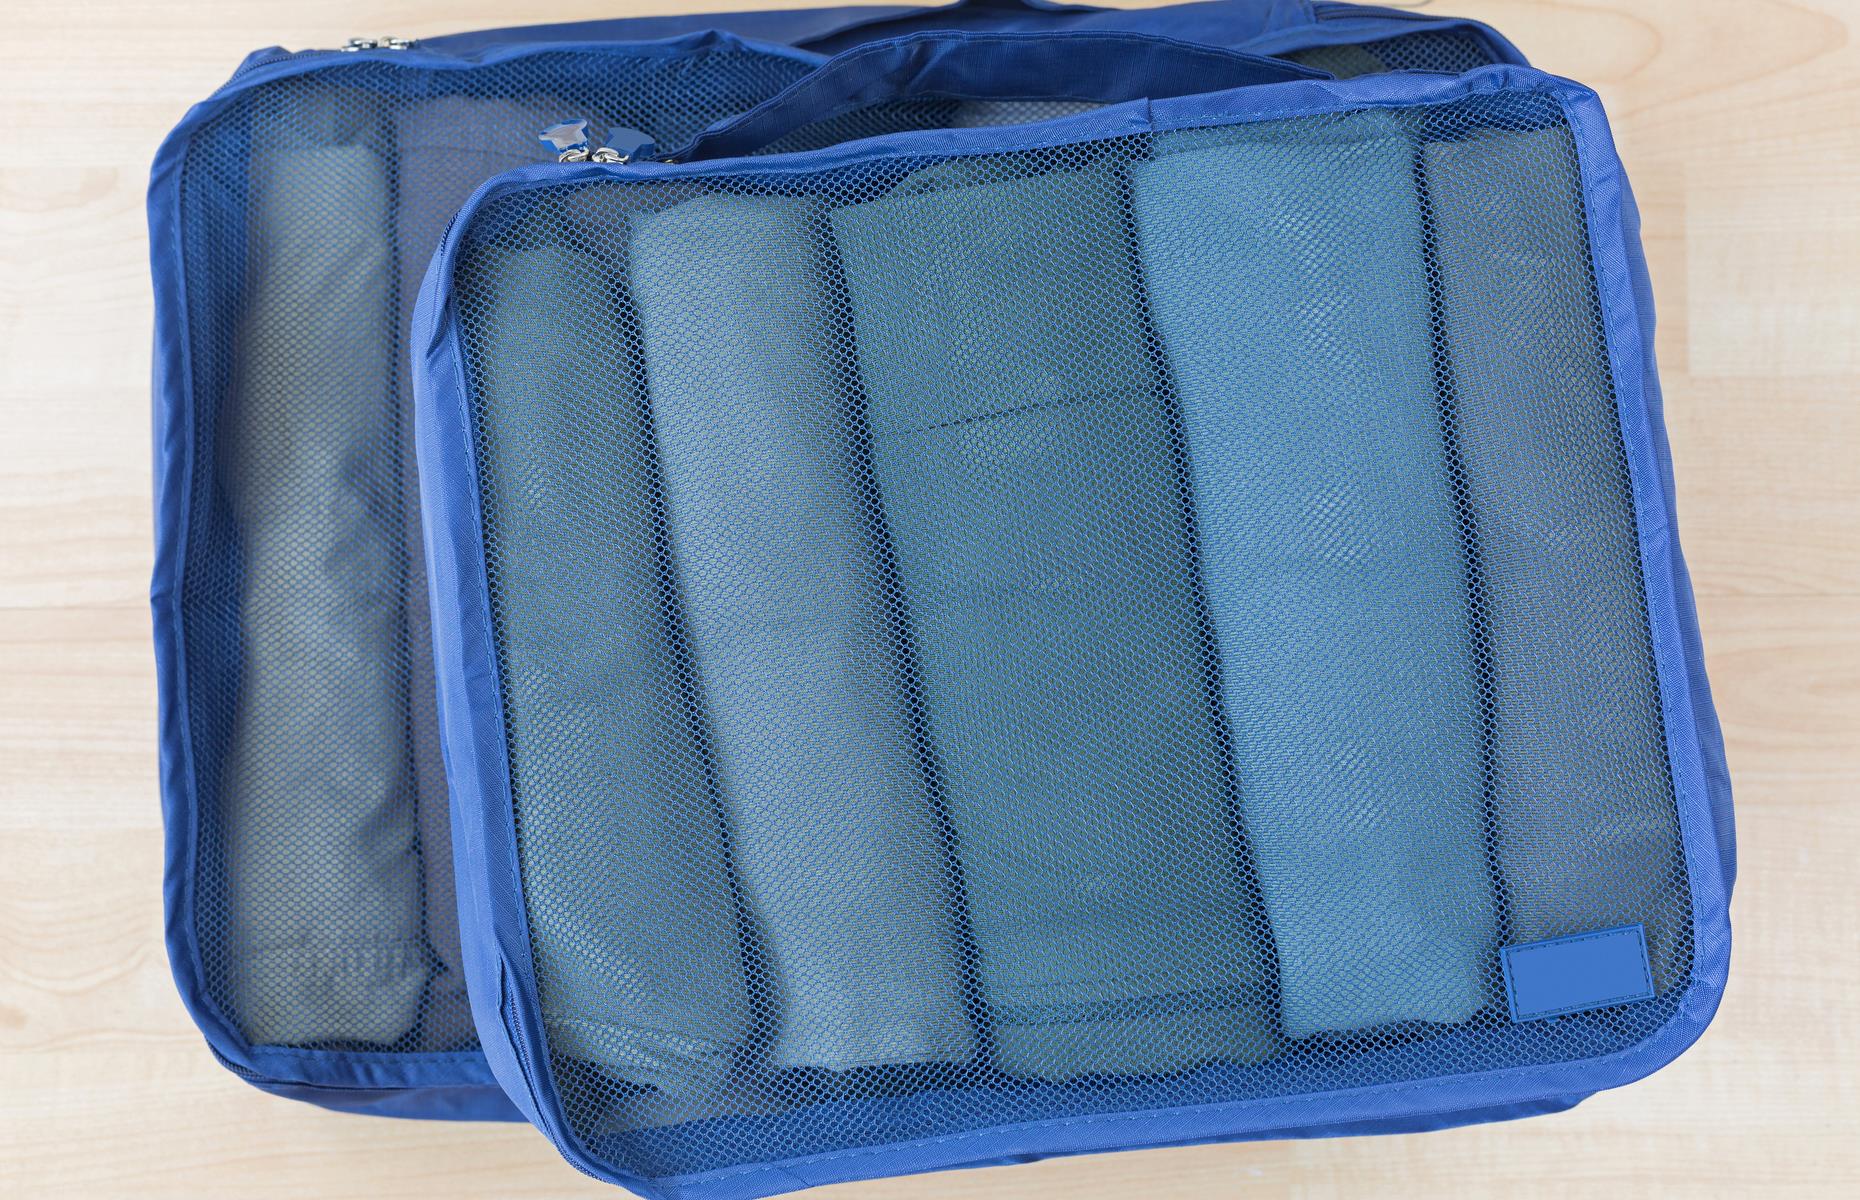 <p>Once you’ve mastered the list, it’s time to get packing. Try to pack as light as possible, but don’t skimp so much that you end up having to hunt down warm clothes or sandals on vacation. Packing cubes are a game changer for strategic packing – separate socks from swimwear for easy access or color code to distinguish different family members' clothes in one bag. Go for compression ones and you can fit more in a case. It also means you don’t need to unpack when you get there – simply unzip and place them in drawers. </p>